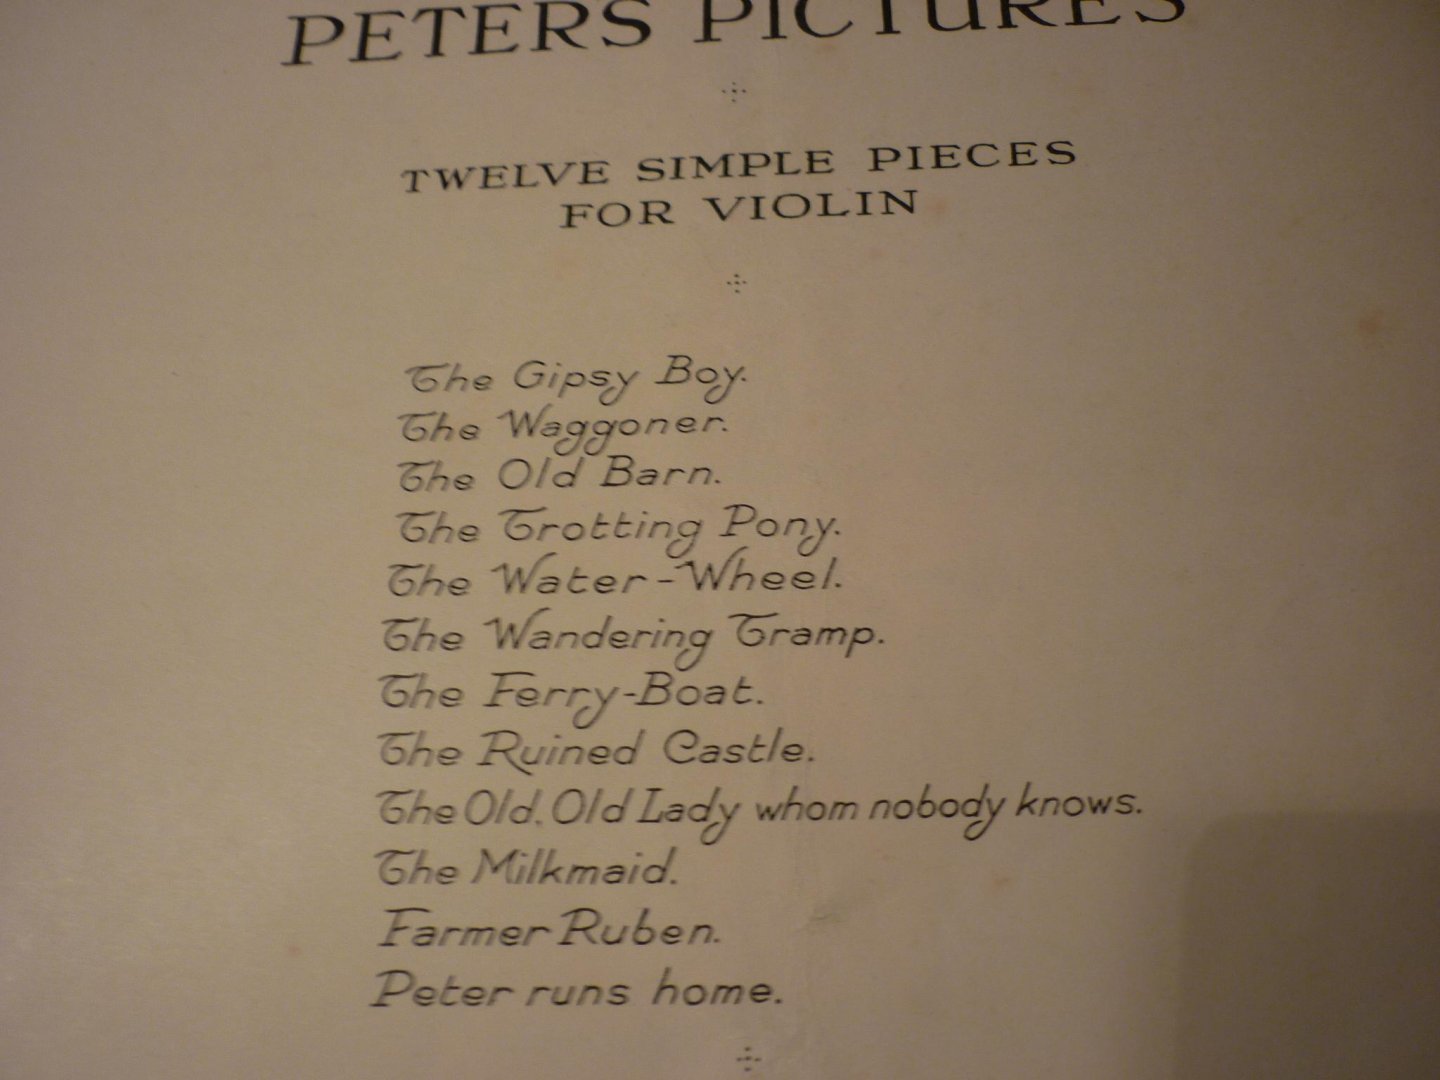 Dalmaine; Cyril C. - Peter's Pictures; 12 simple pieces for violin